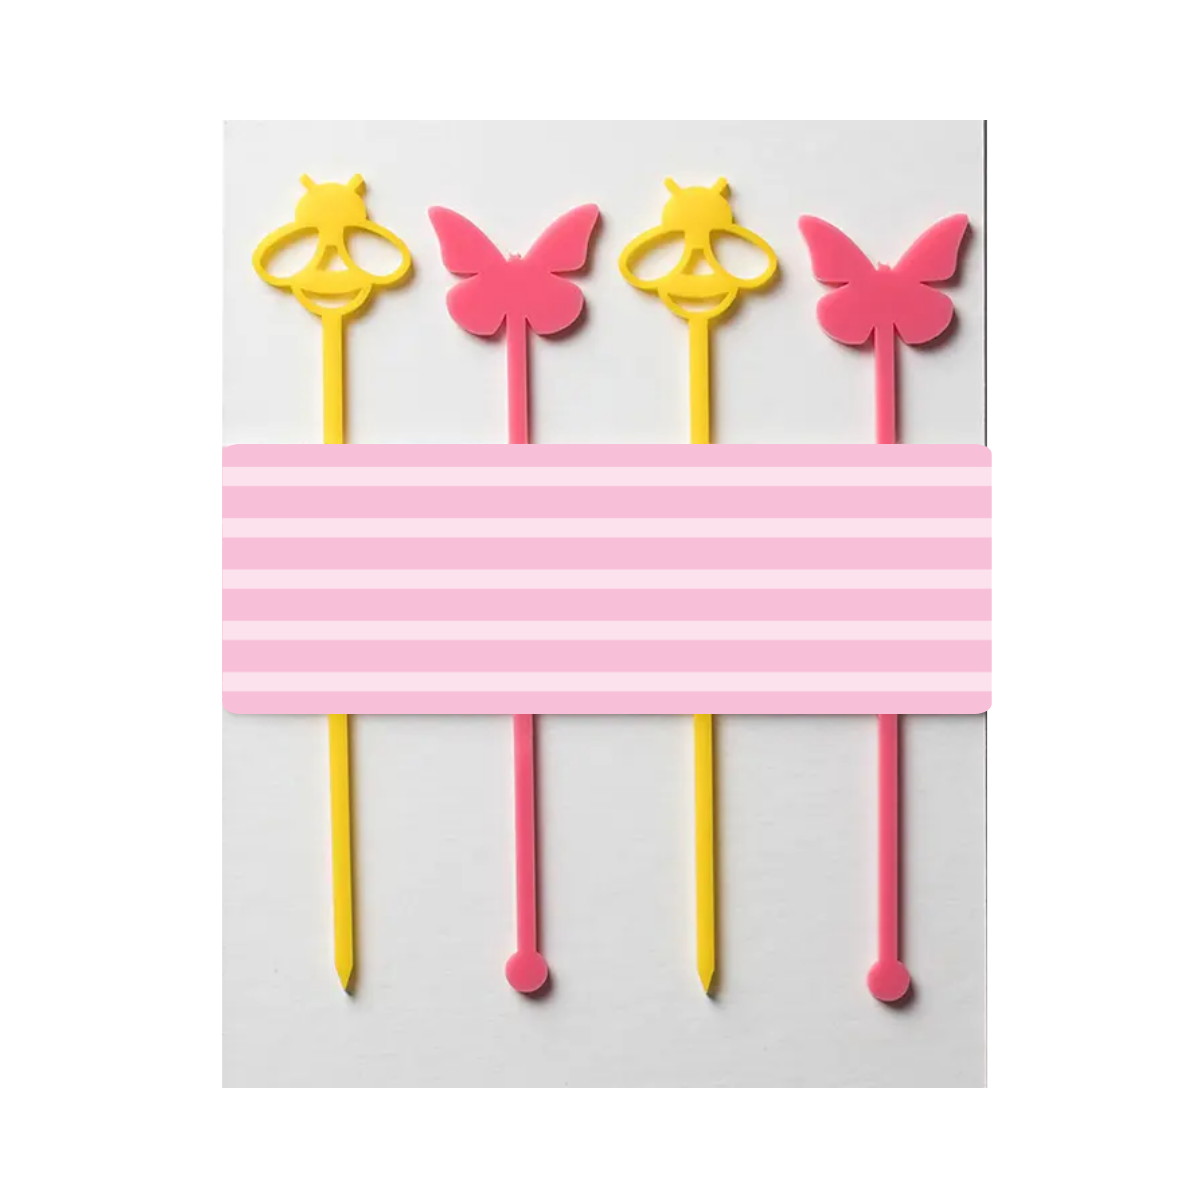 Bees & Butterflies Acrylic Drink Stirrers, Set of 4